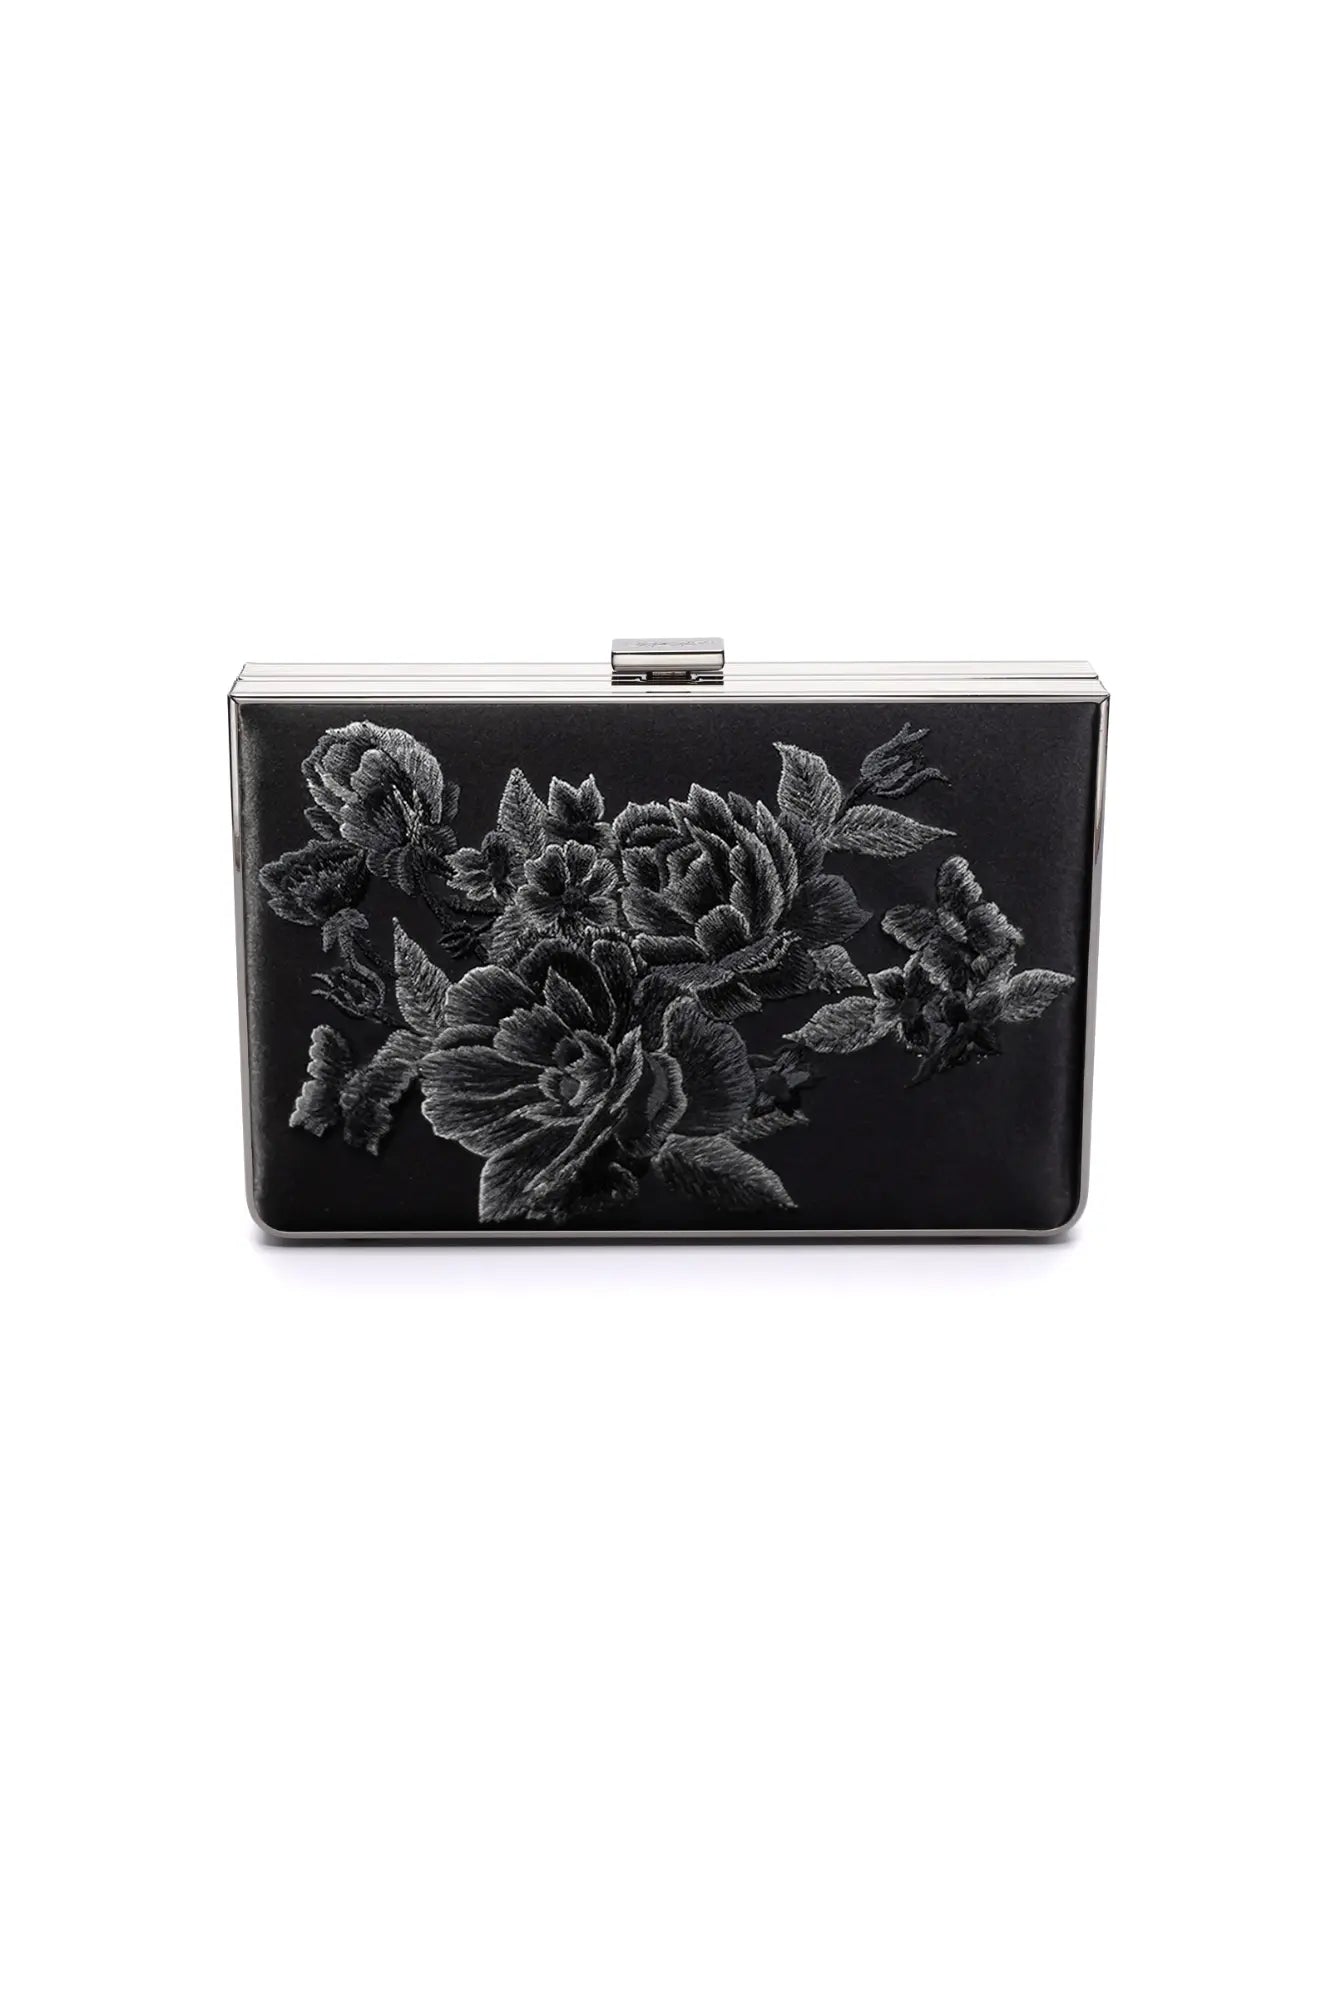 The Bella Rosa Collection&#39;s Venezia Clutch x MICAELA - Black Satin Floral Embroidery with floral embroidery design on a white background.